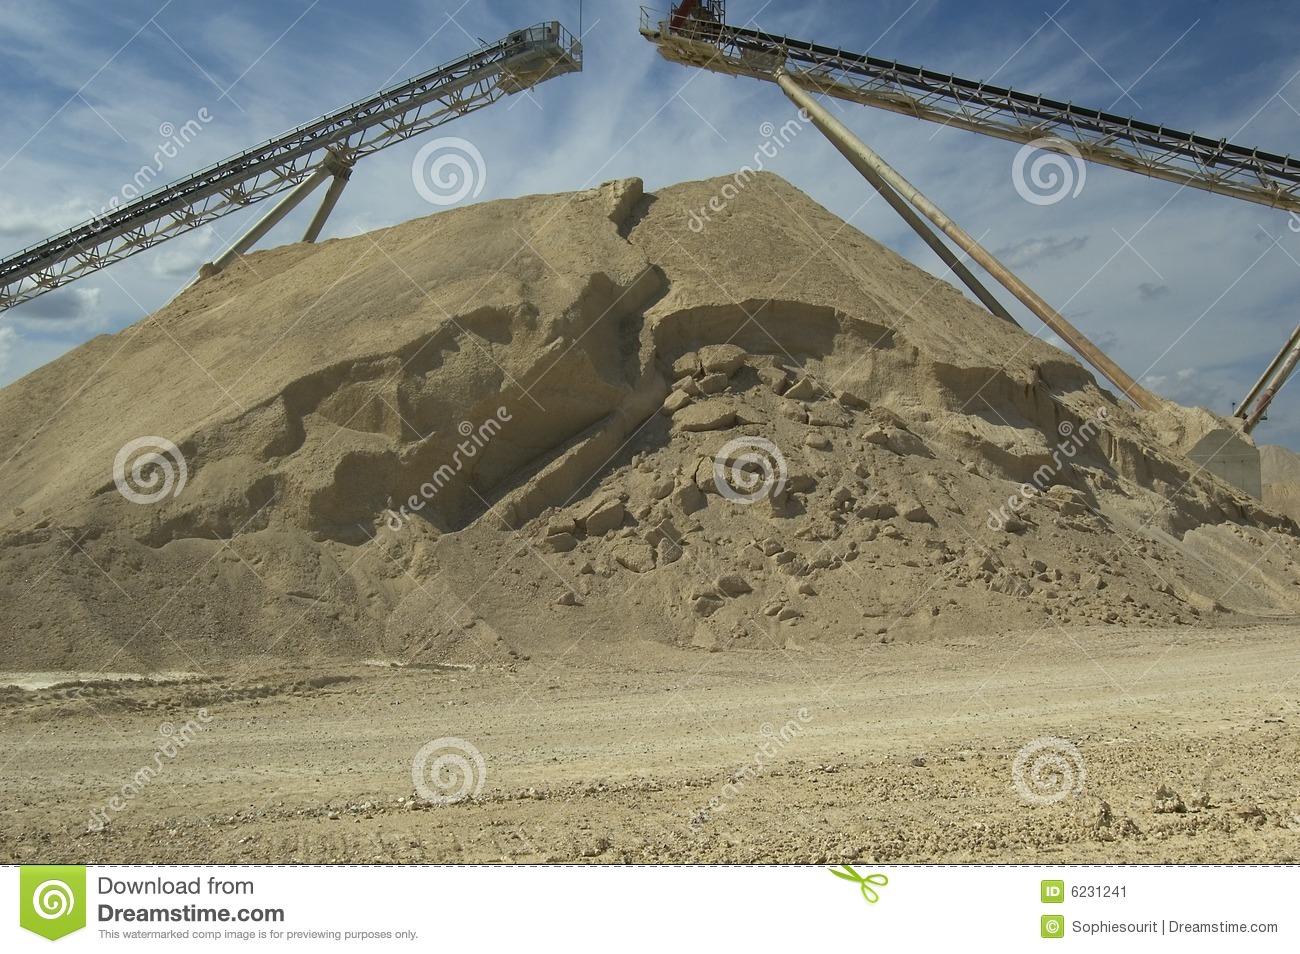 Pile Of Sand Excavation Of Raw Materials For Cement And Other